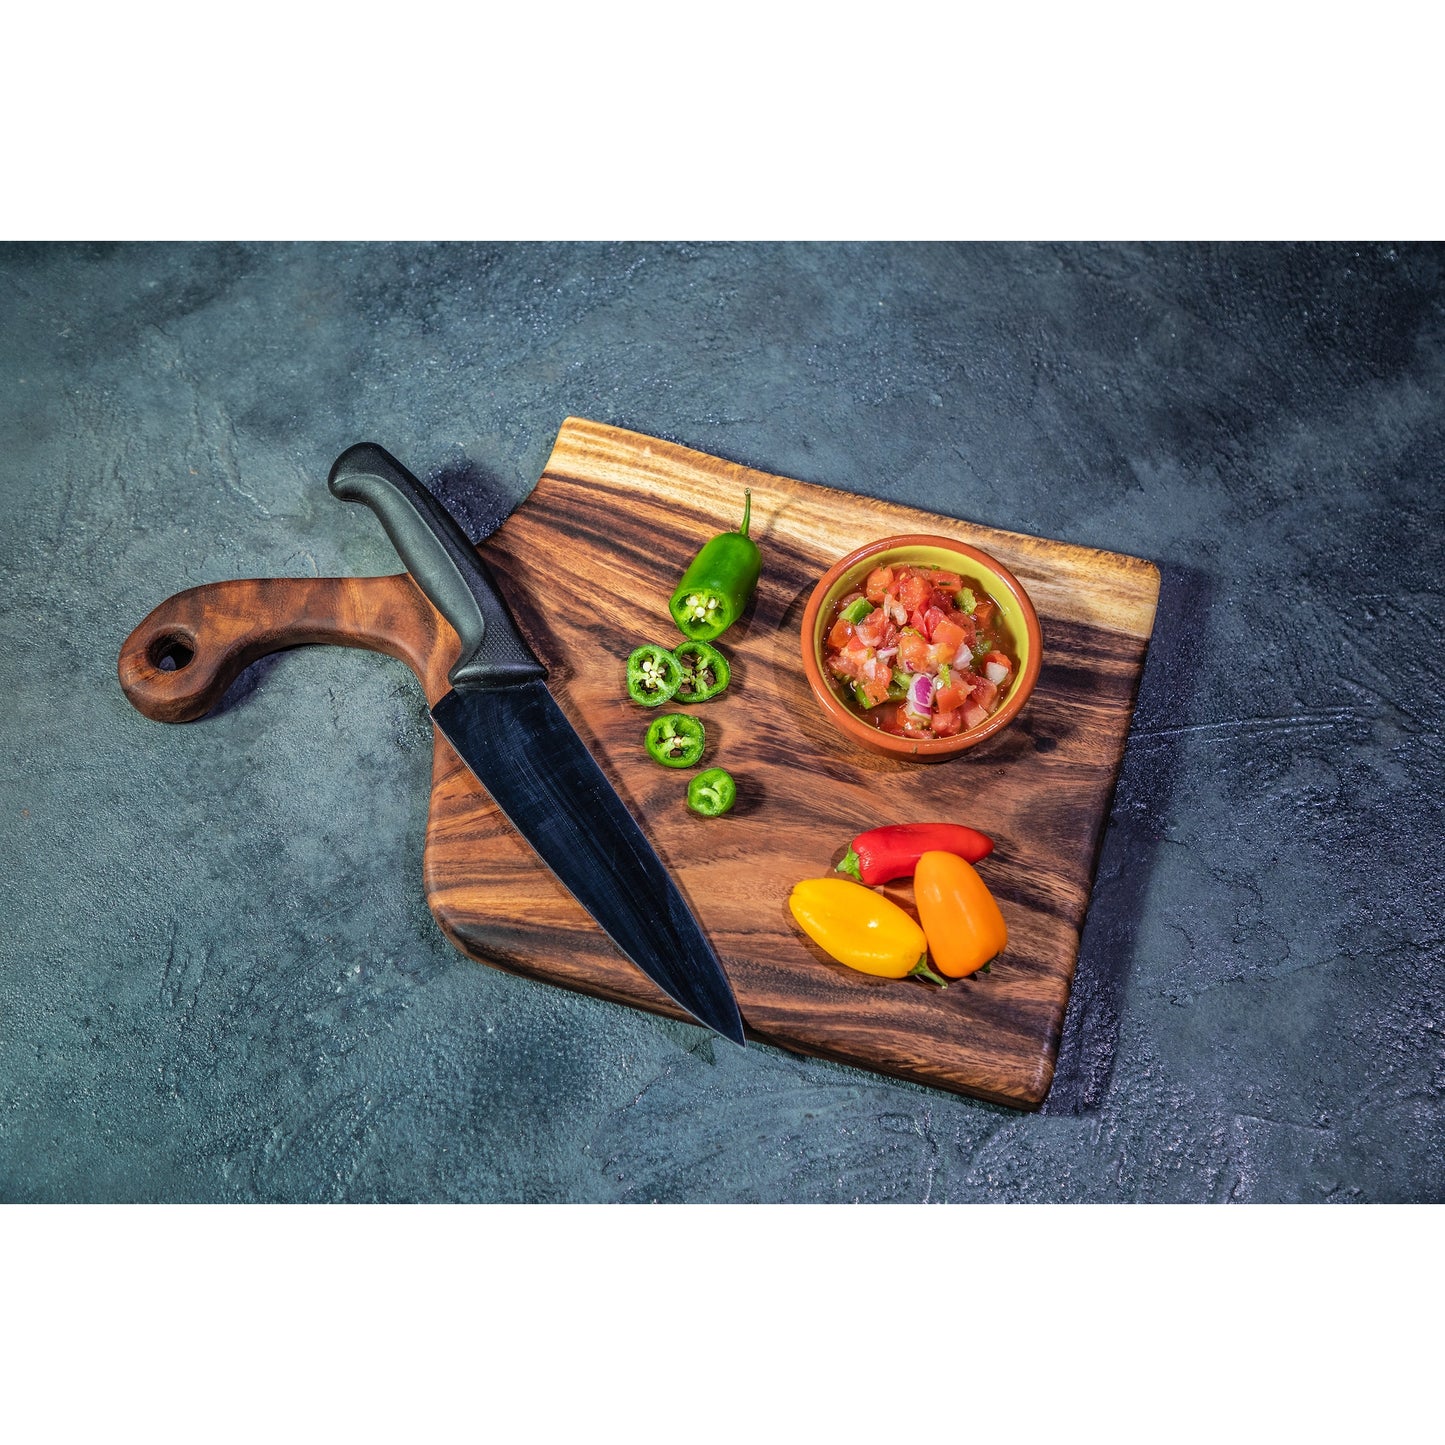 Tuckahoe Hardwoods Charcuterie Board - Live Edge with Handle 18x10" available at The Good Life Boutique